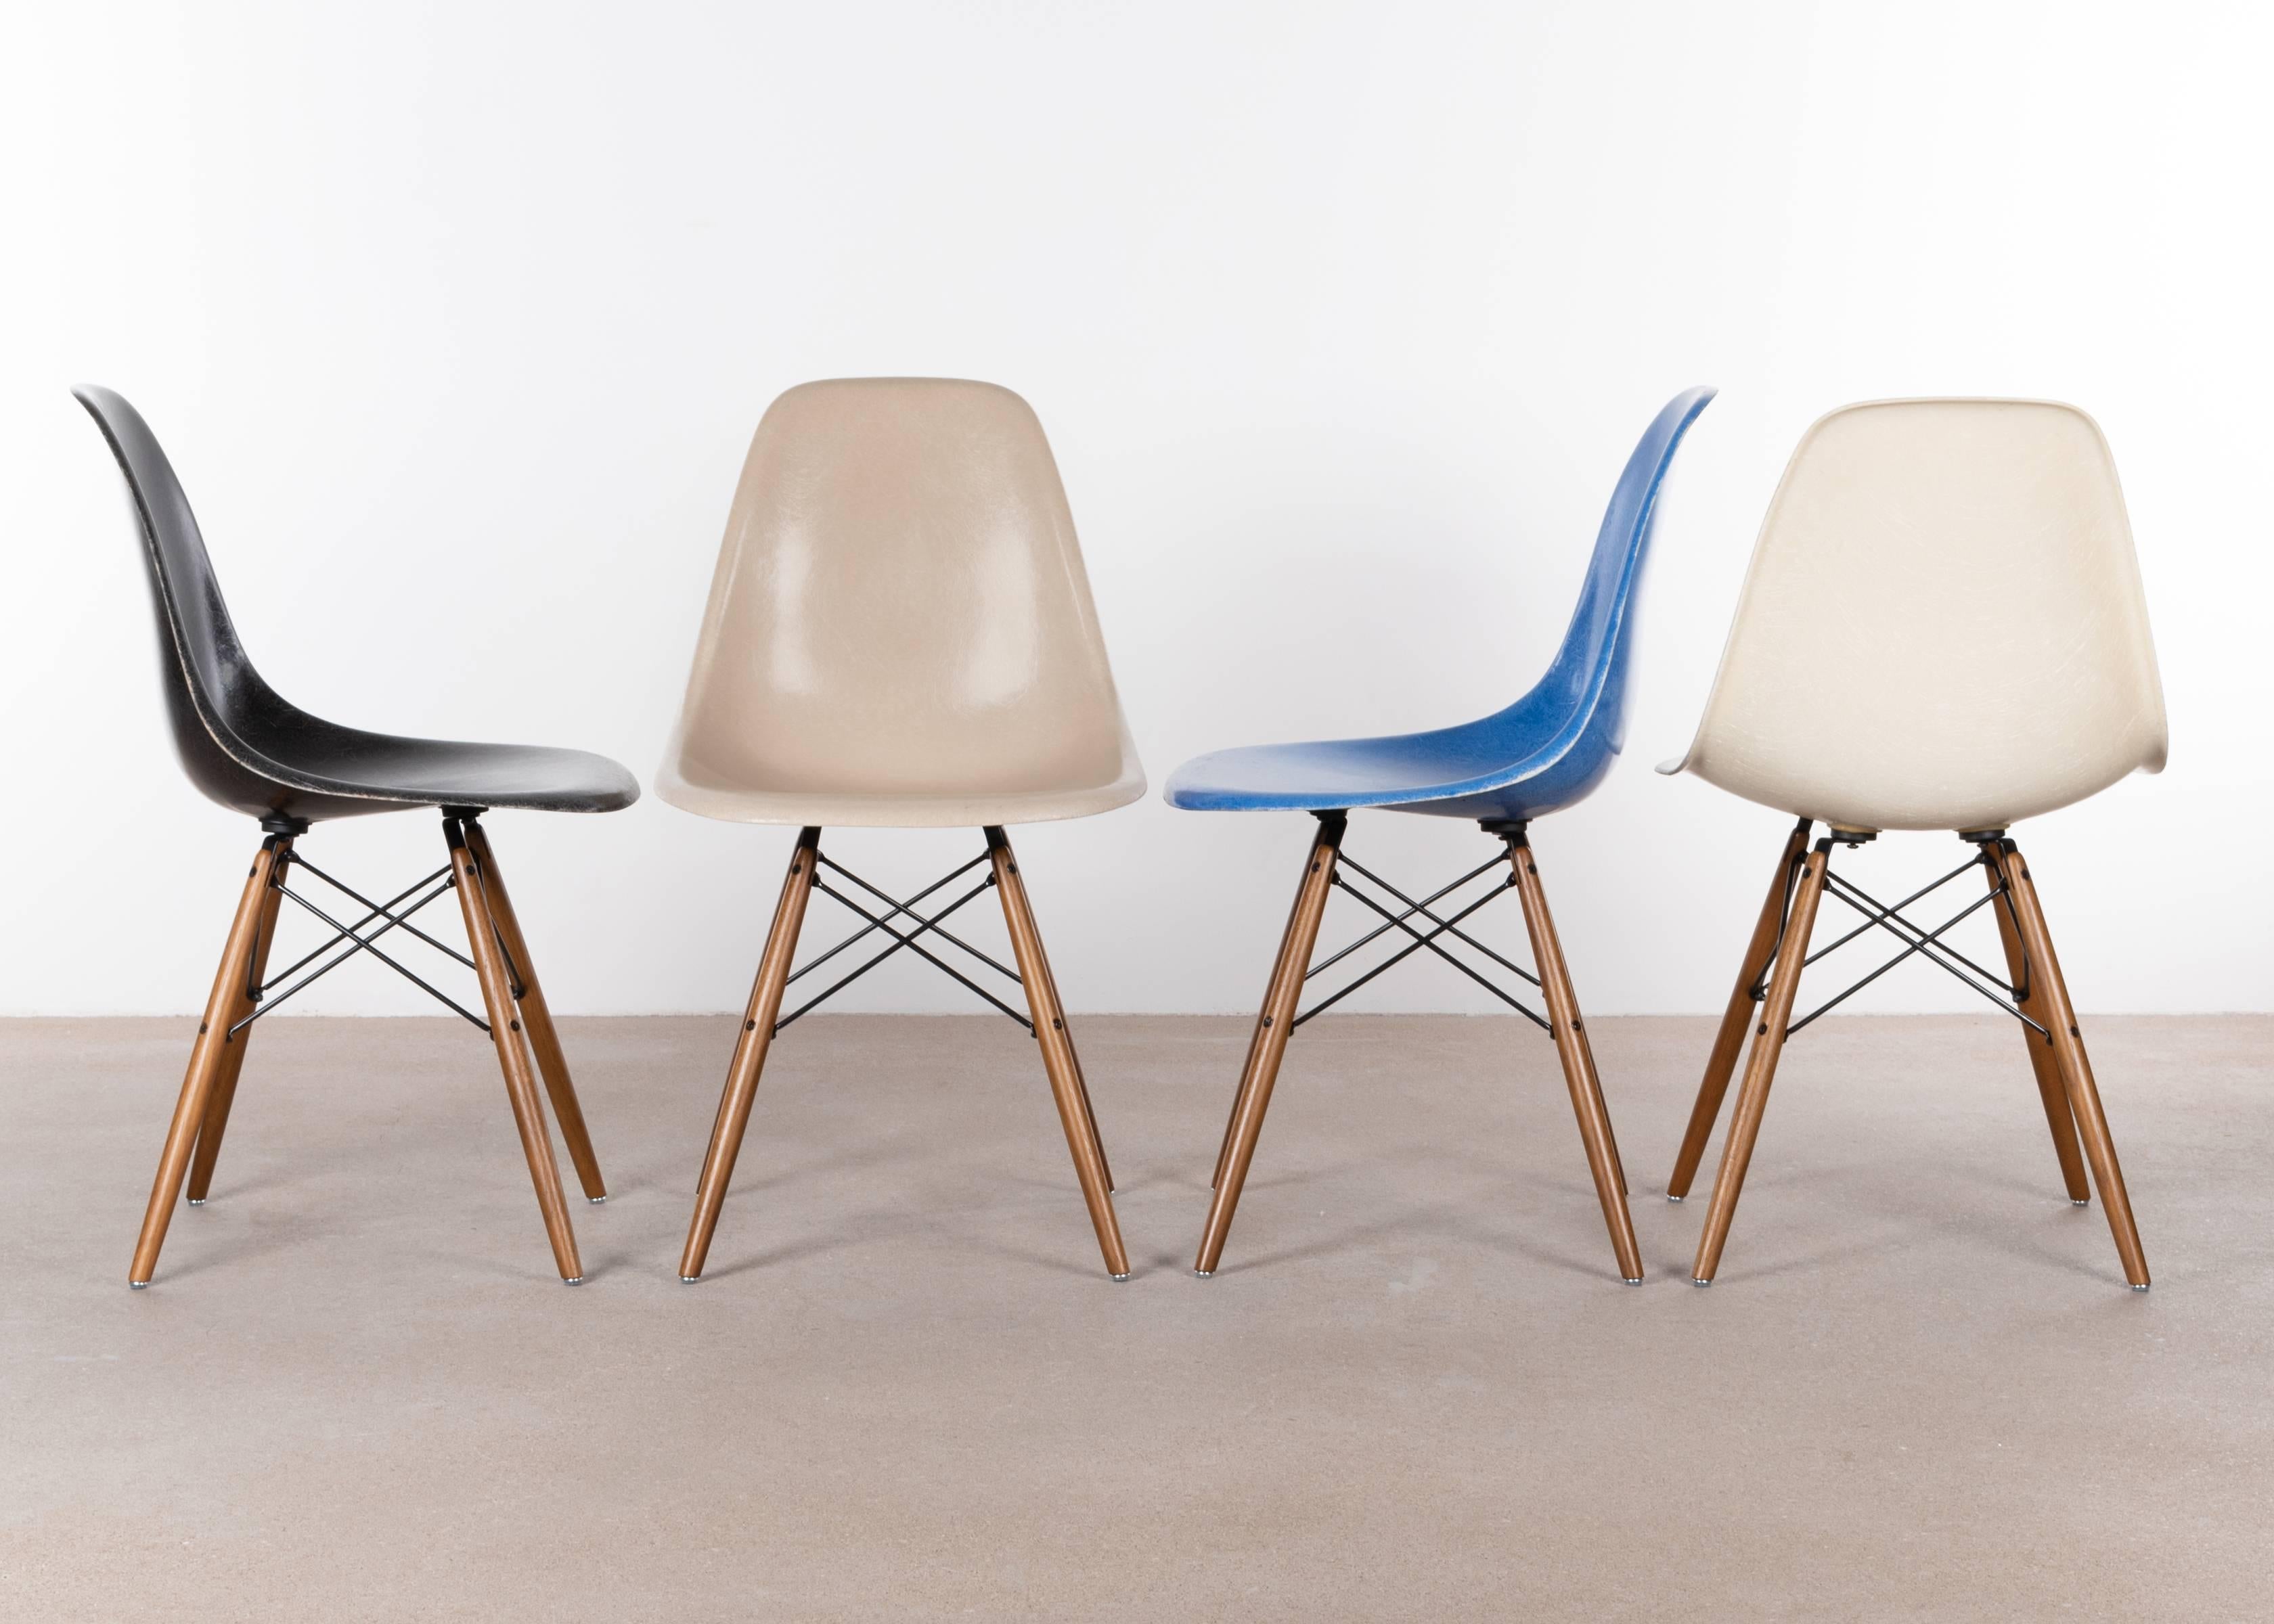 Beautiful iconic DSW chairs in colors: Black, greige, ultramarine blue and parchment.
Shells are in very good or excellent condition with only slight traces of use. Replaced shock mounts which guarantee save usability for the next decades. Each